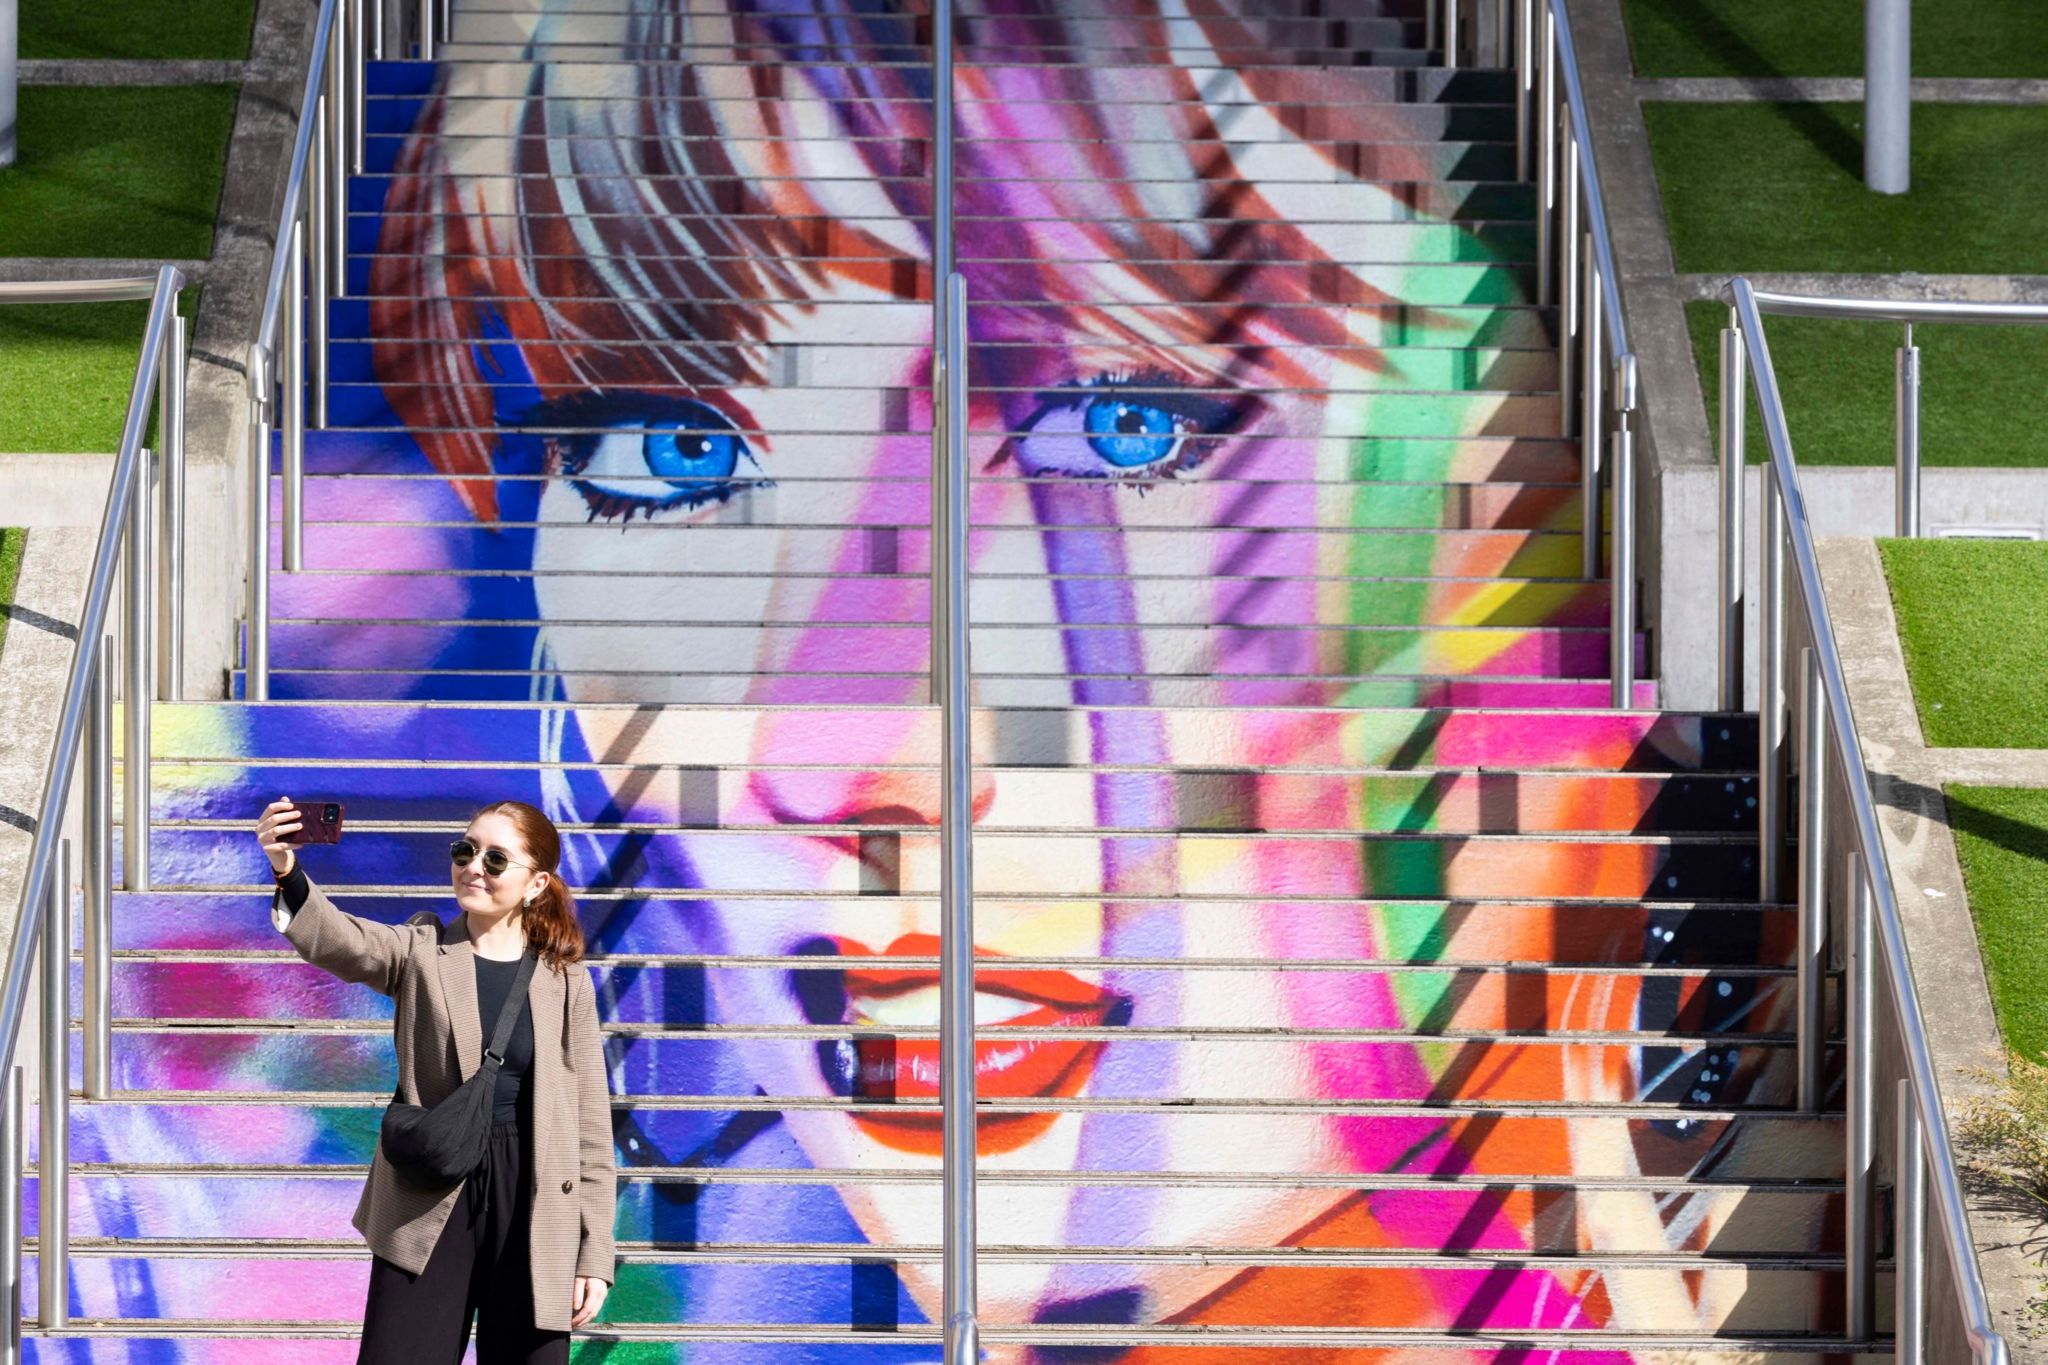 Swiftie Steps are unveiled along with new murals at Wembley Park